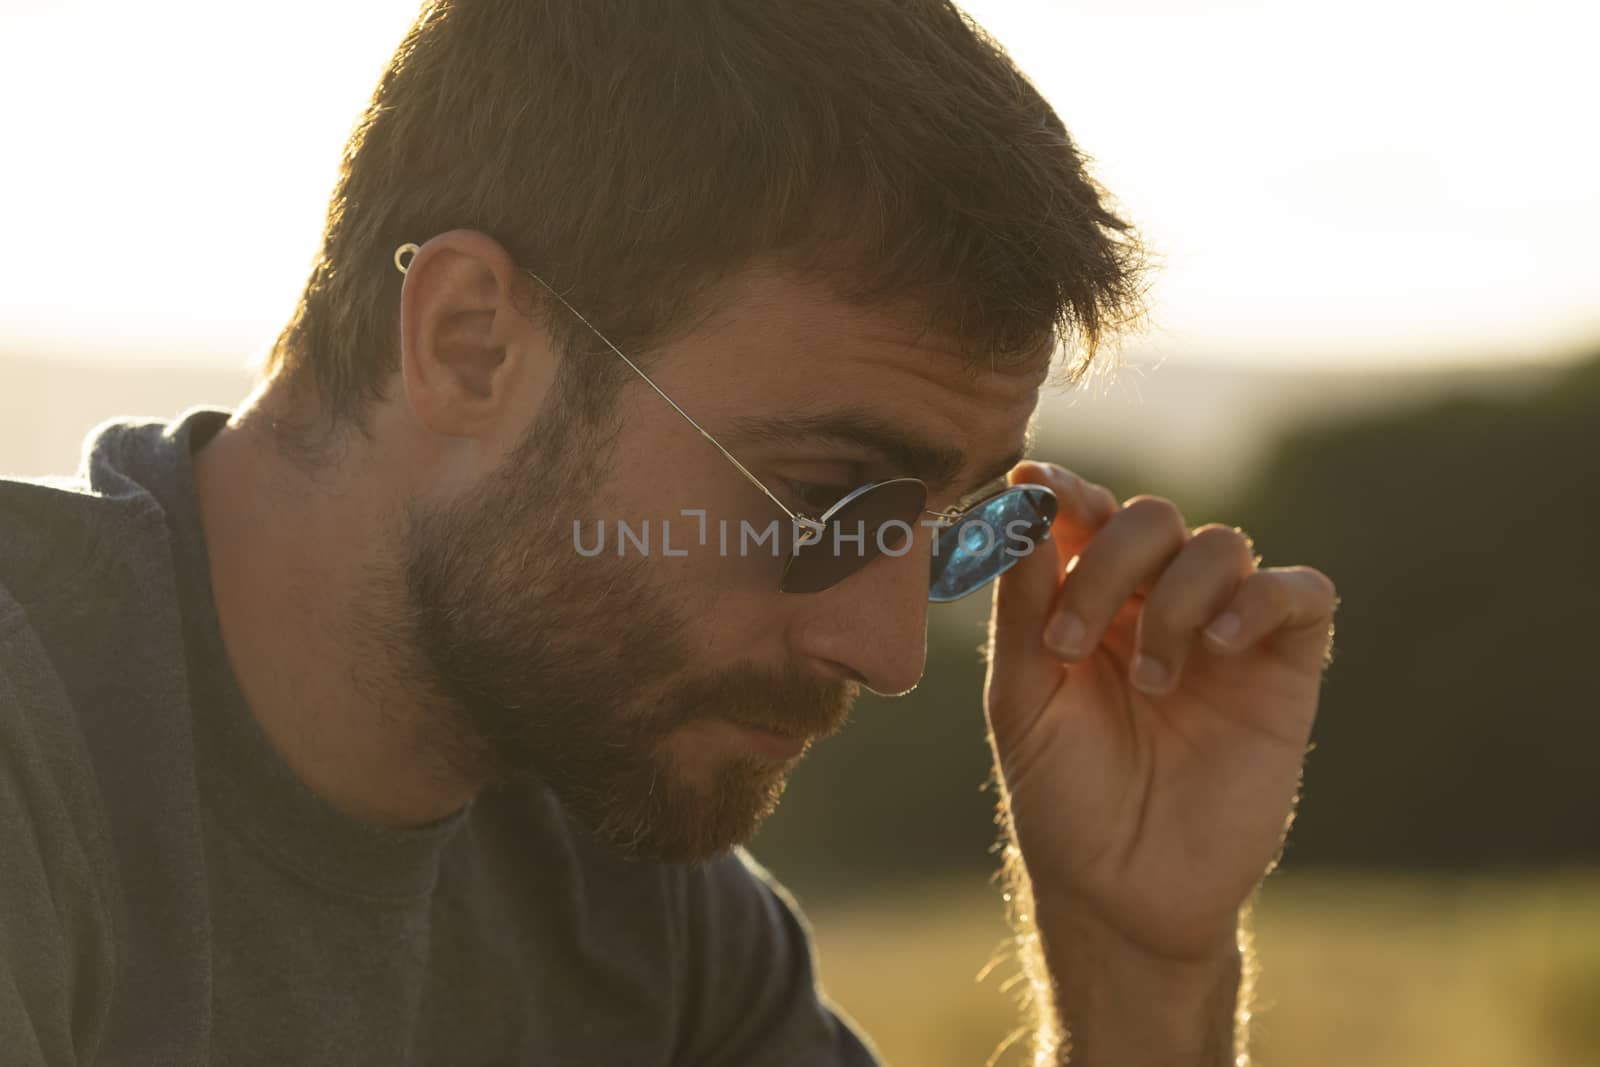 A young man puts on his sunglasses by alvarobueno